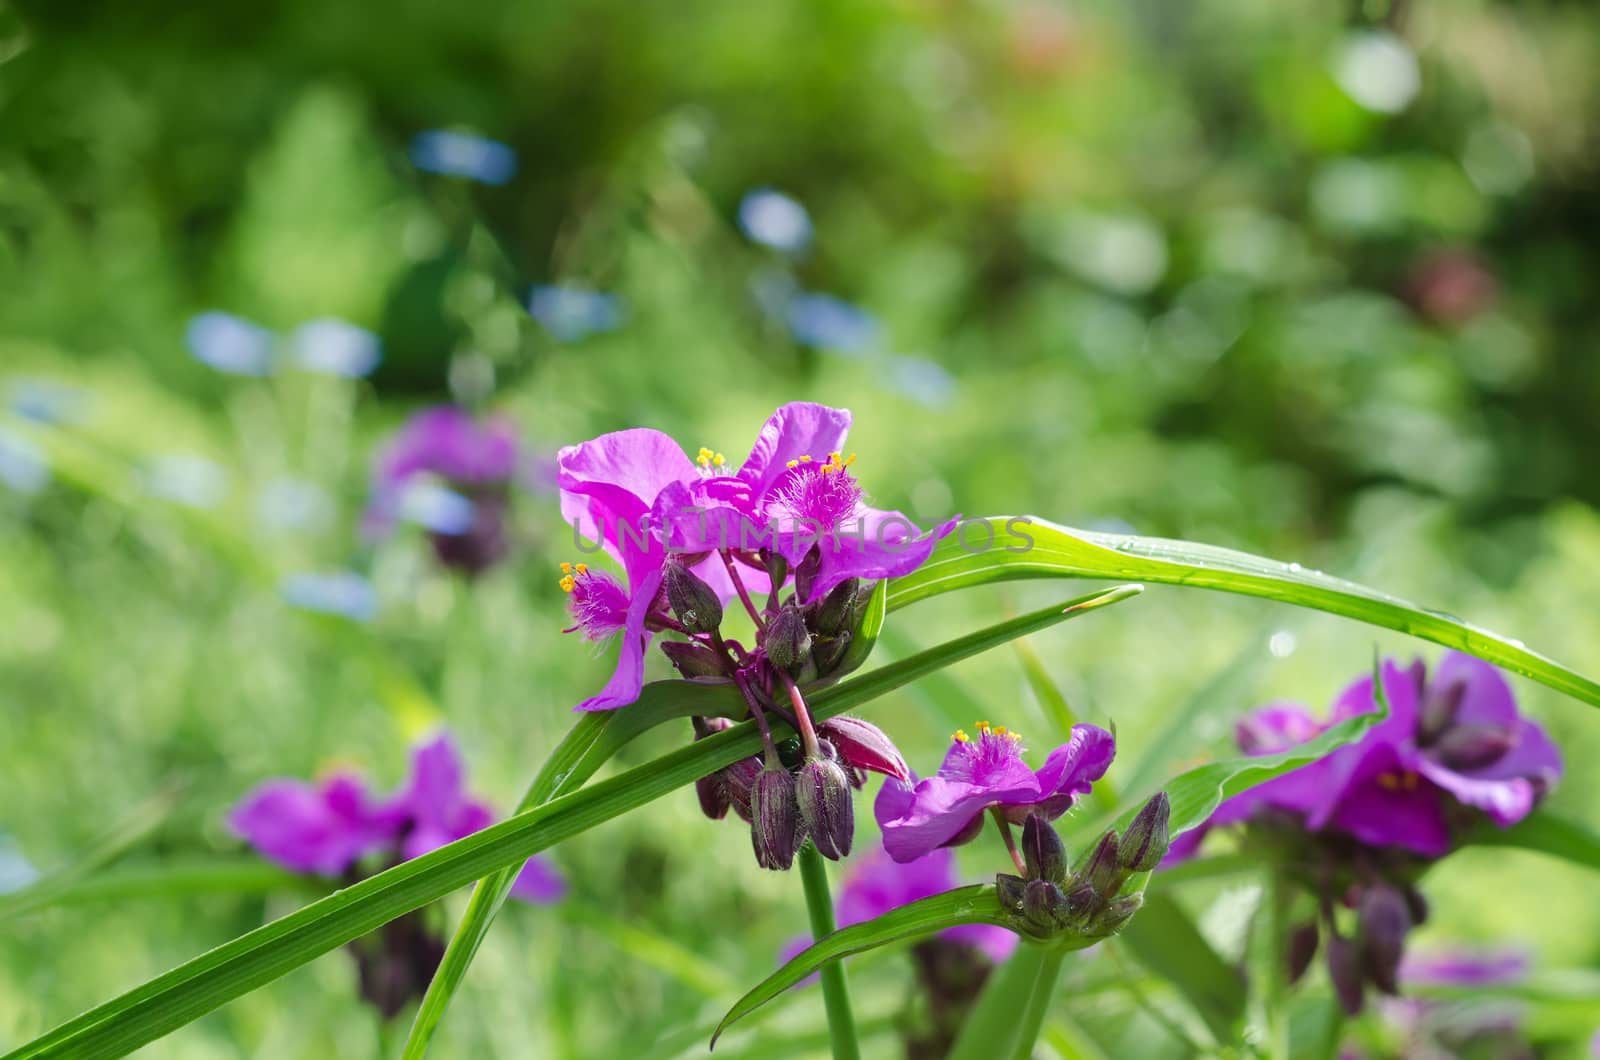 Spiderwort flowers on nature background, colorful bokeh